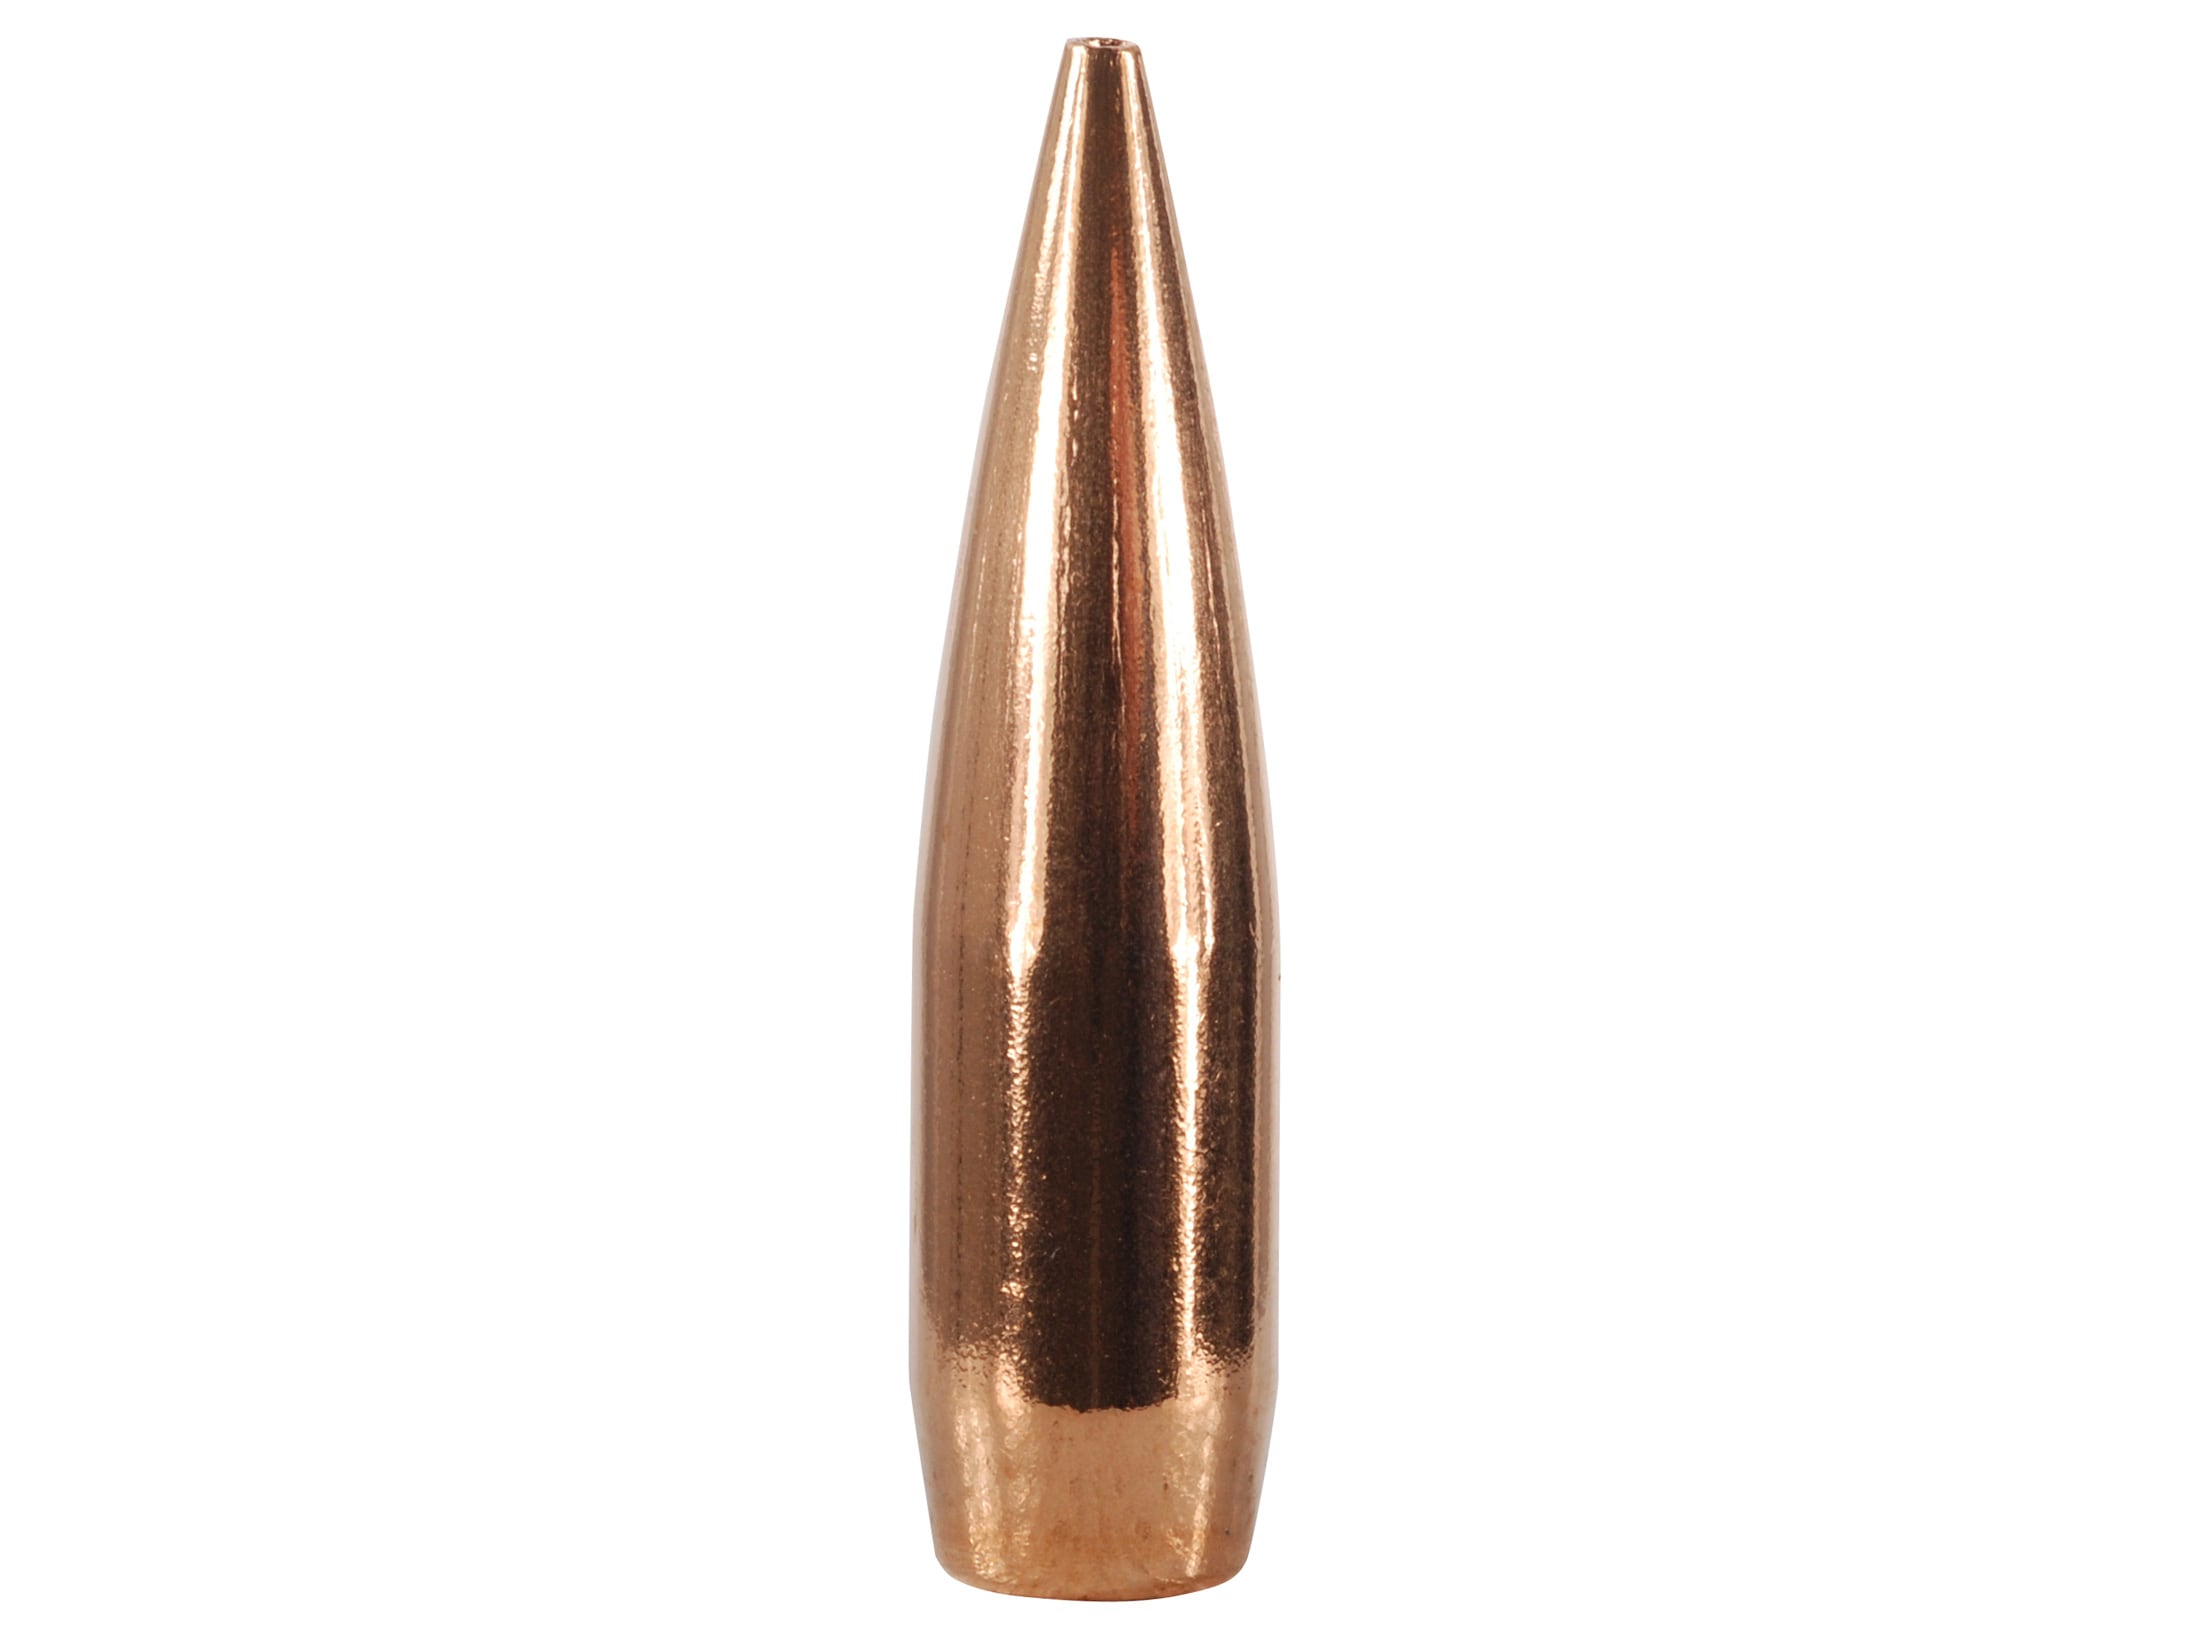 Berger Hunting Bullets 30 Caliber (308 Diameter) 168 Grain VLD Hollow Point Boat Tail